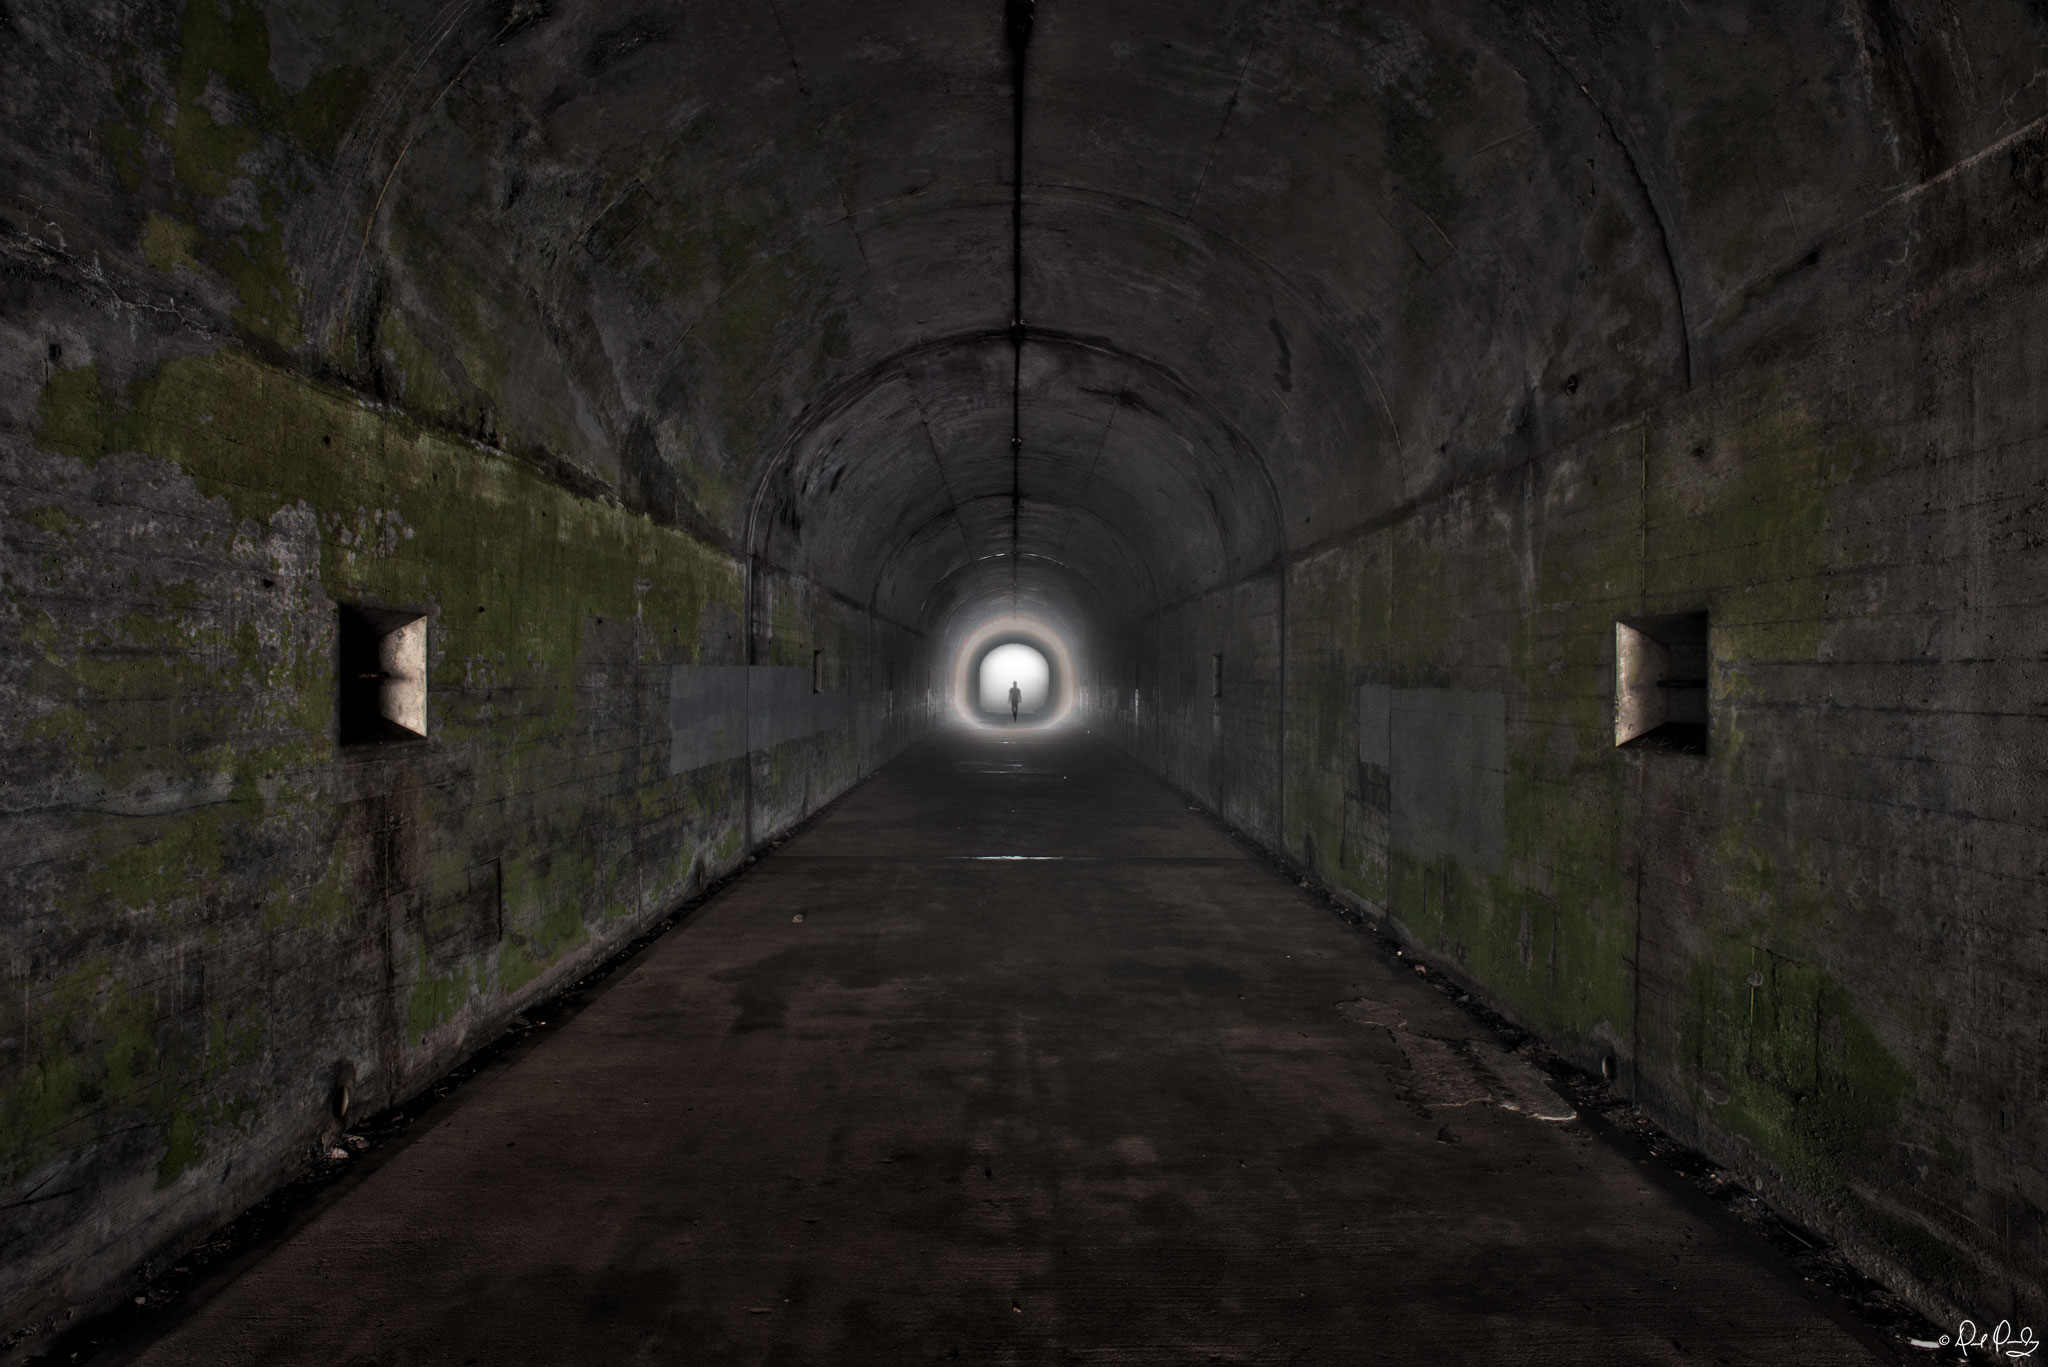 General 2048x1367 architecture building photo manipulation tunnel abandoned lights moss silhouette